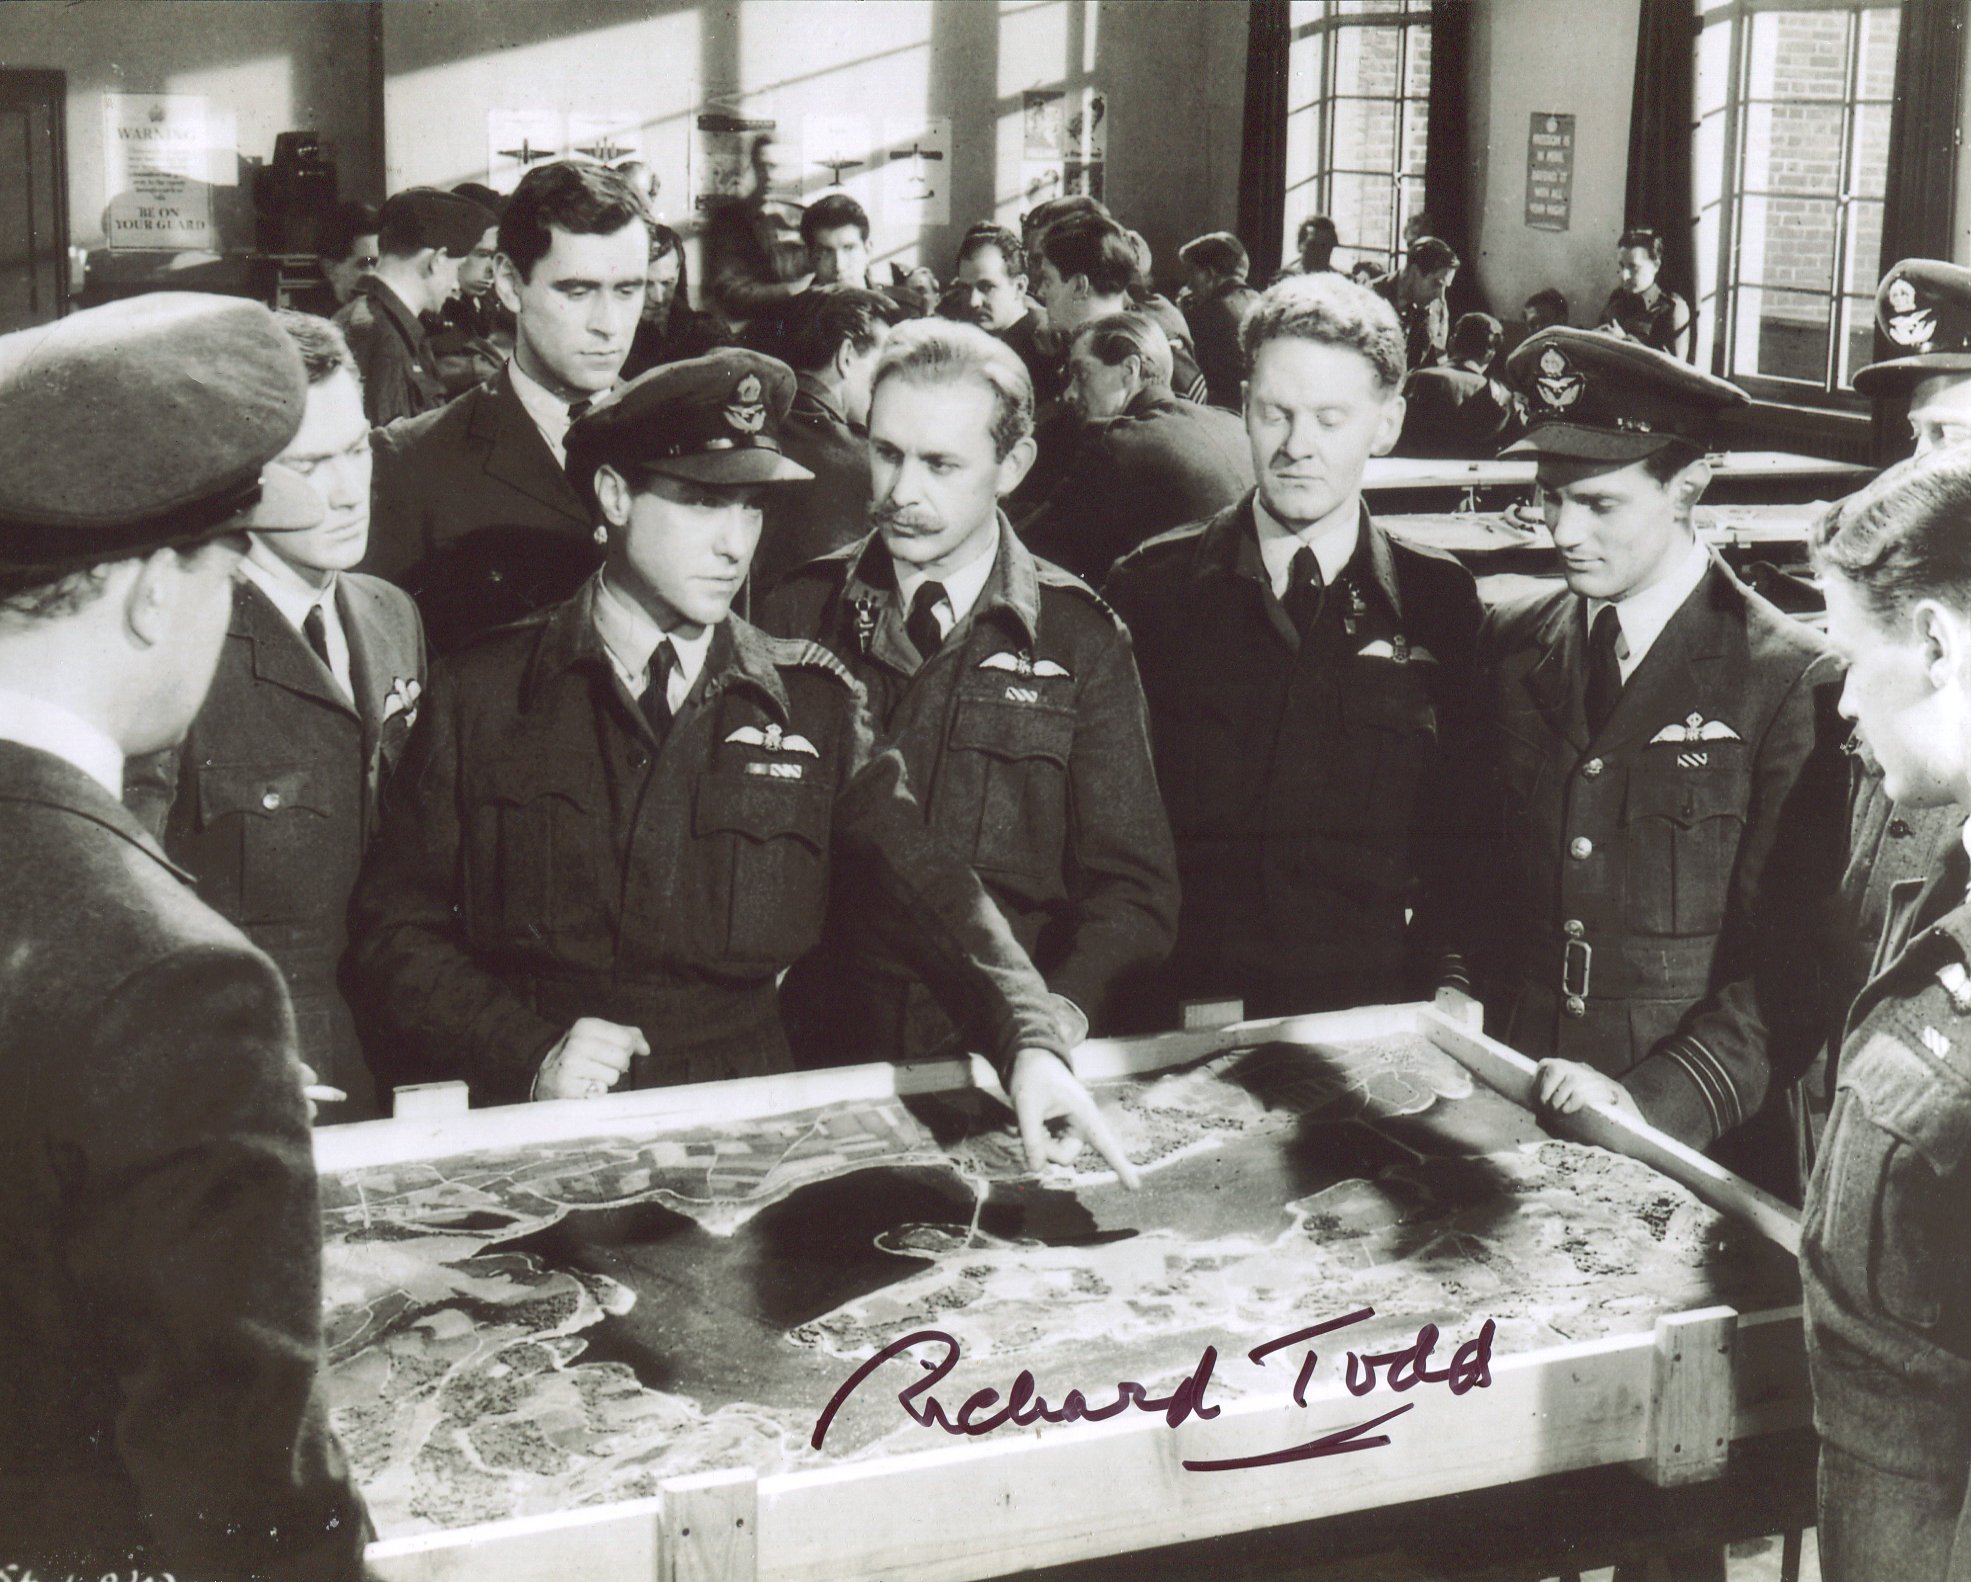 The Dambusters 8x10 movie scene photo signed by the late Richard Todd. Good condition. All